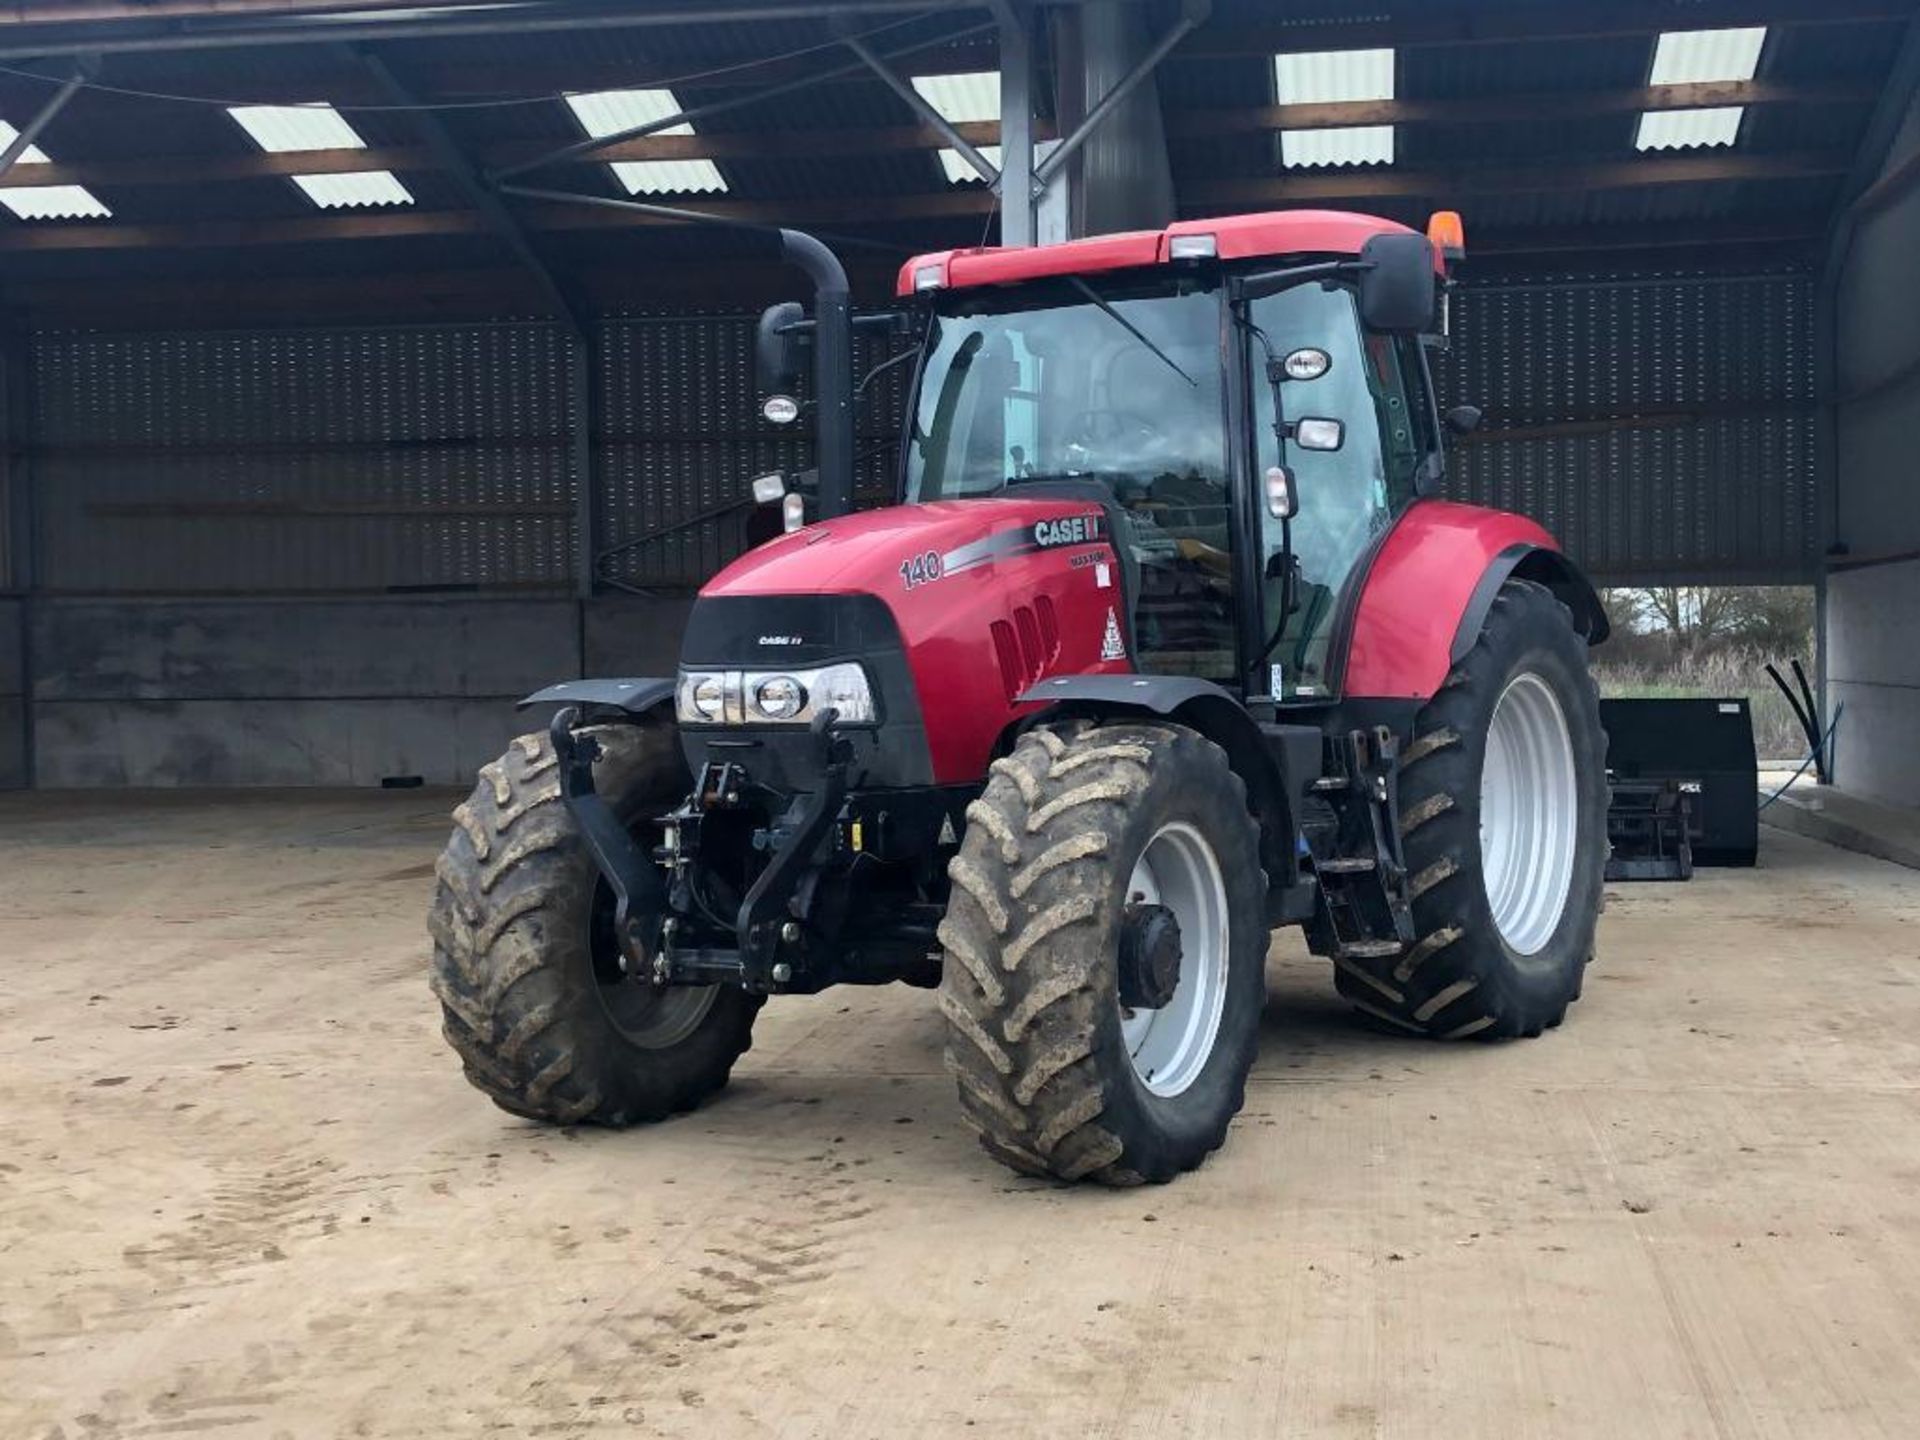 2013 Case Maxxum 140 50kph 4wd Powershift tractor with multicontroller joystick, front linkage, cab